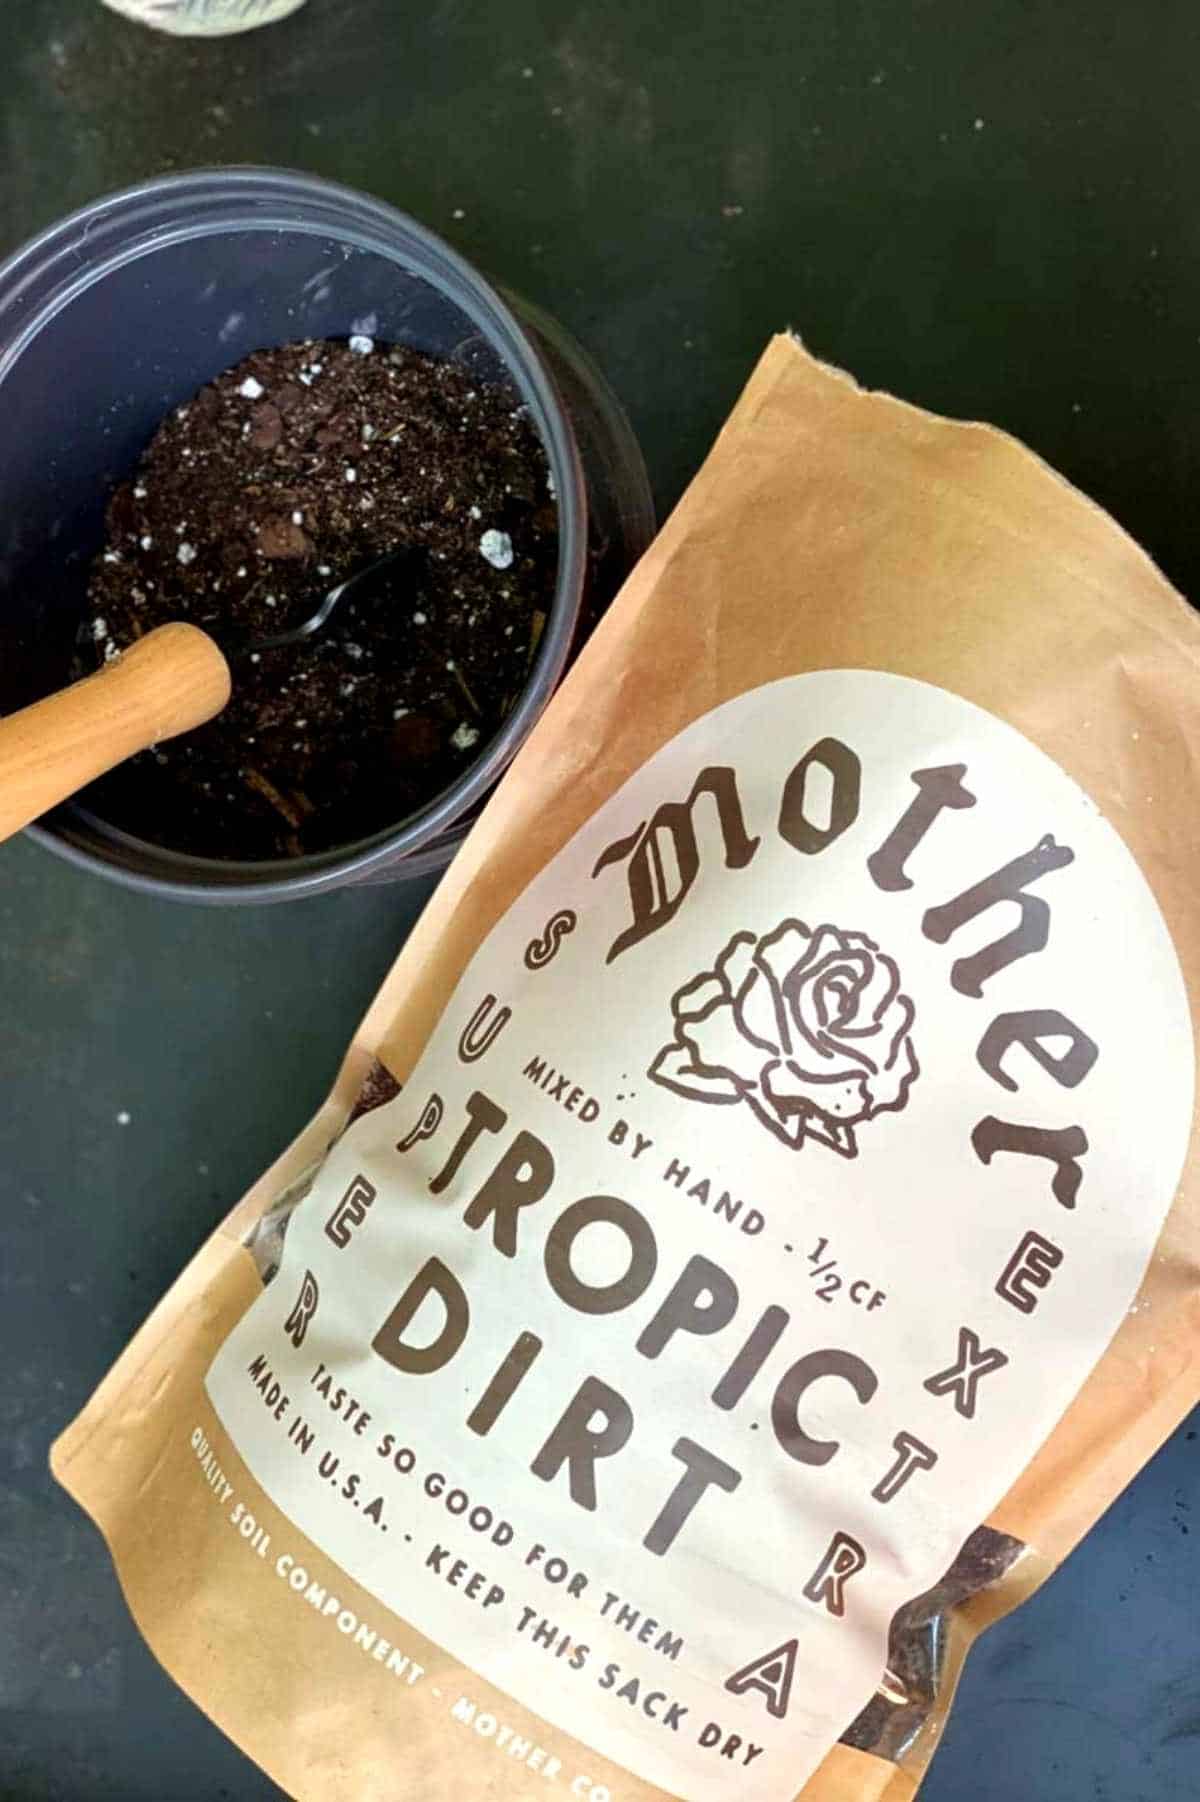 A bag of Mother Co. tropic dirt soil for indoor plants next to a container and trowel